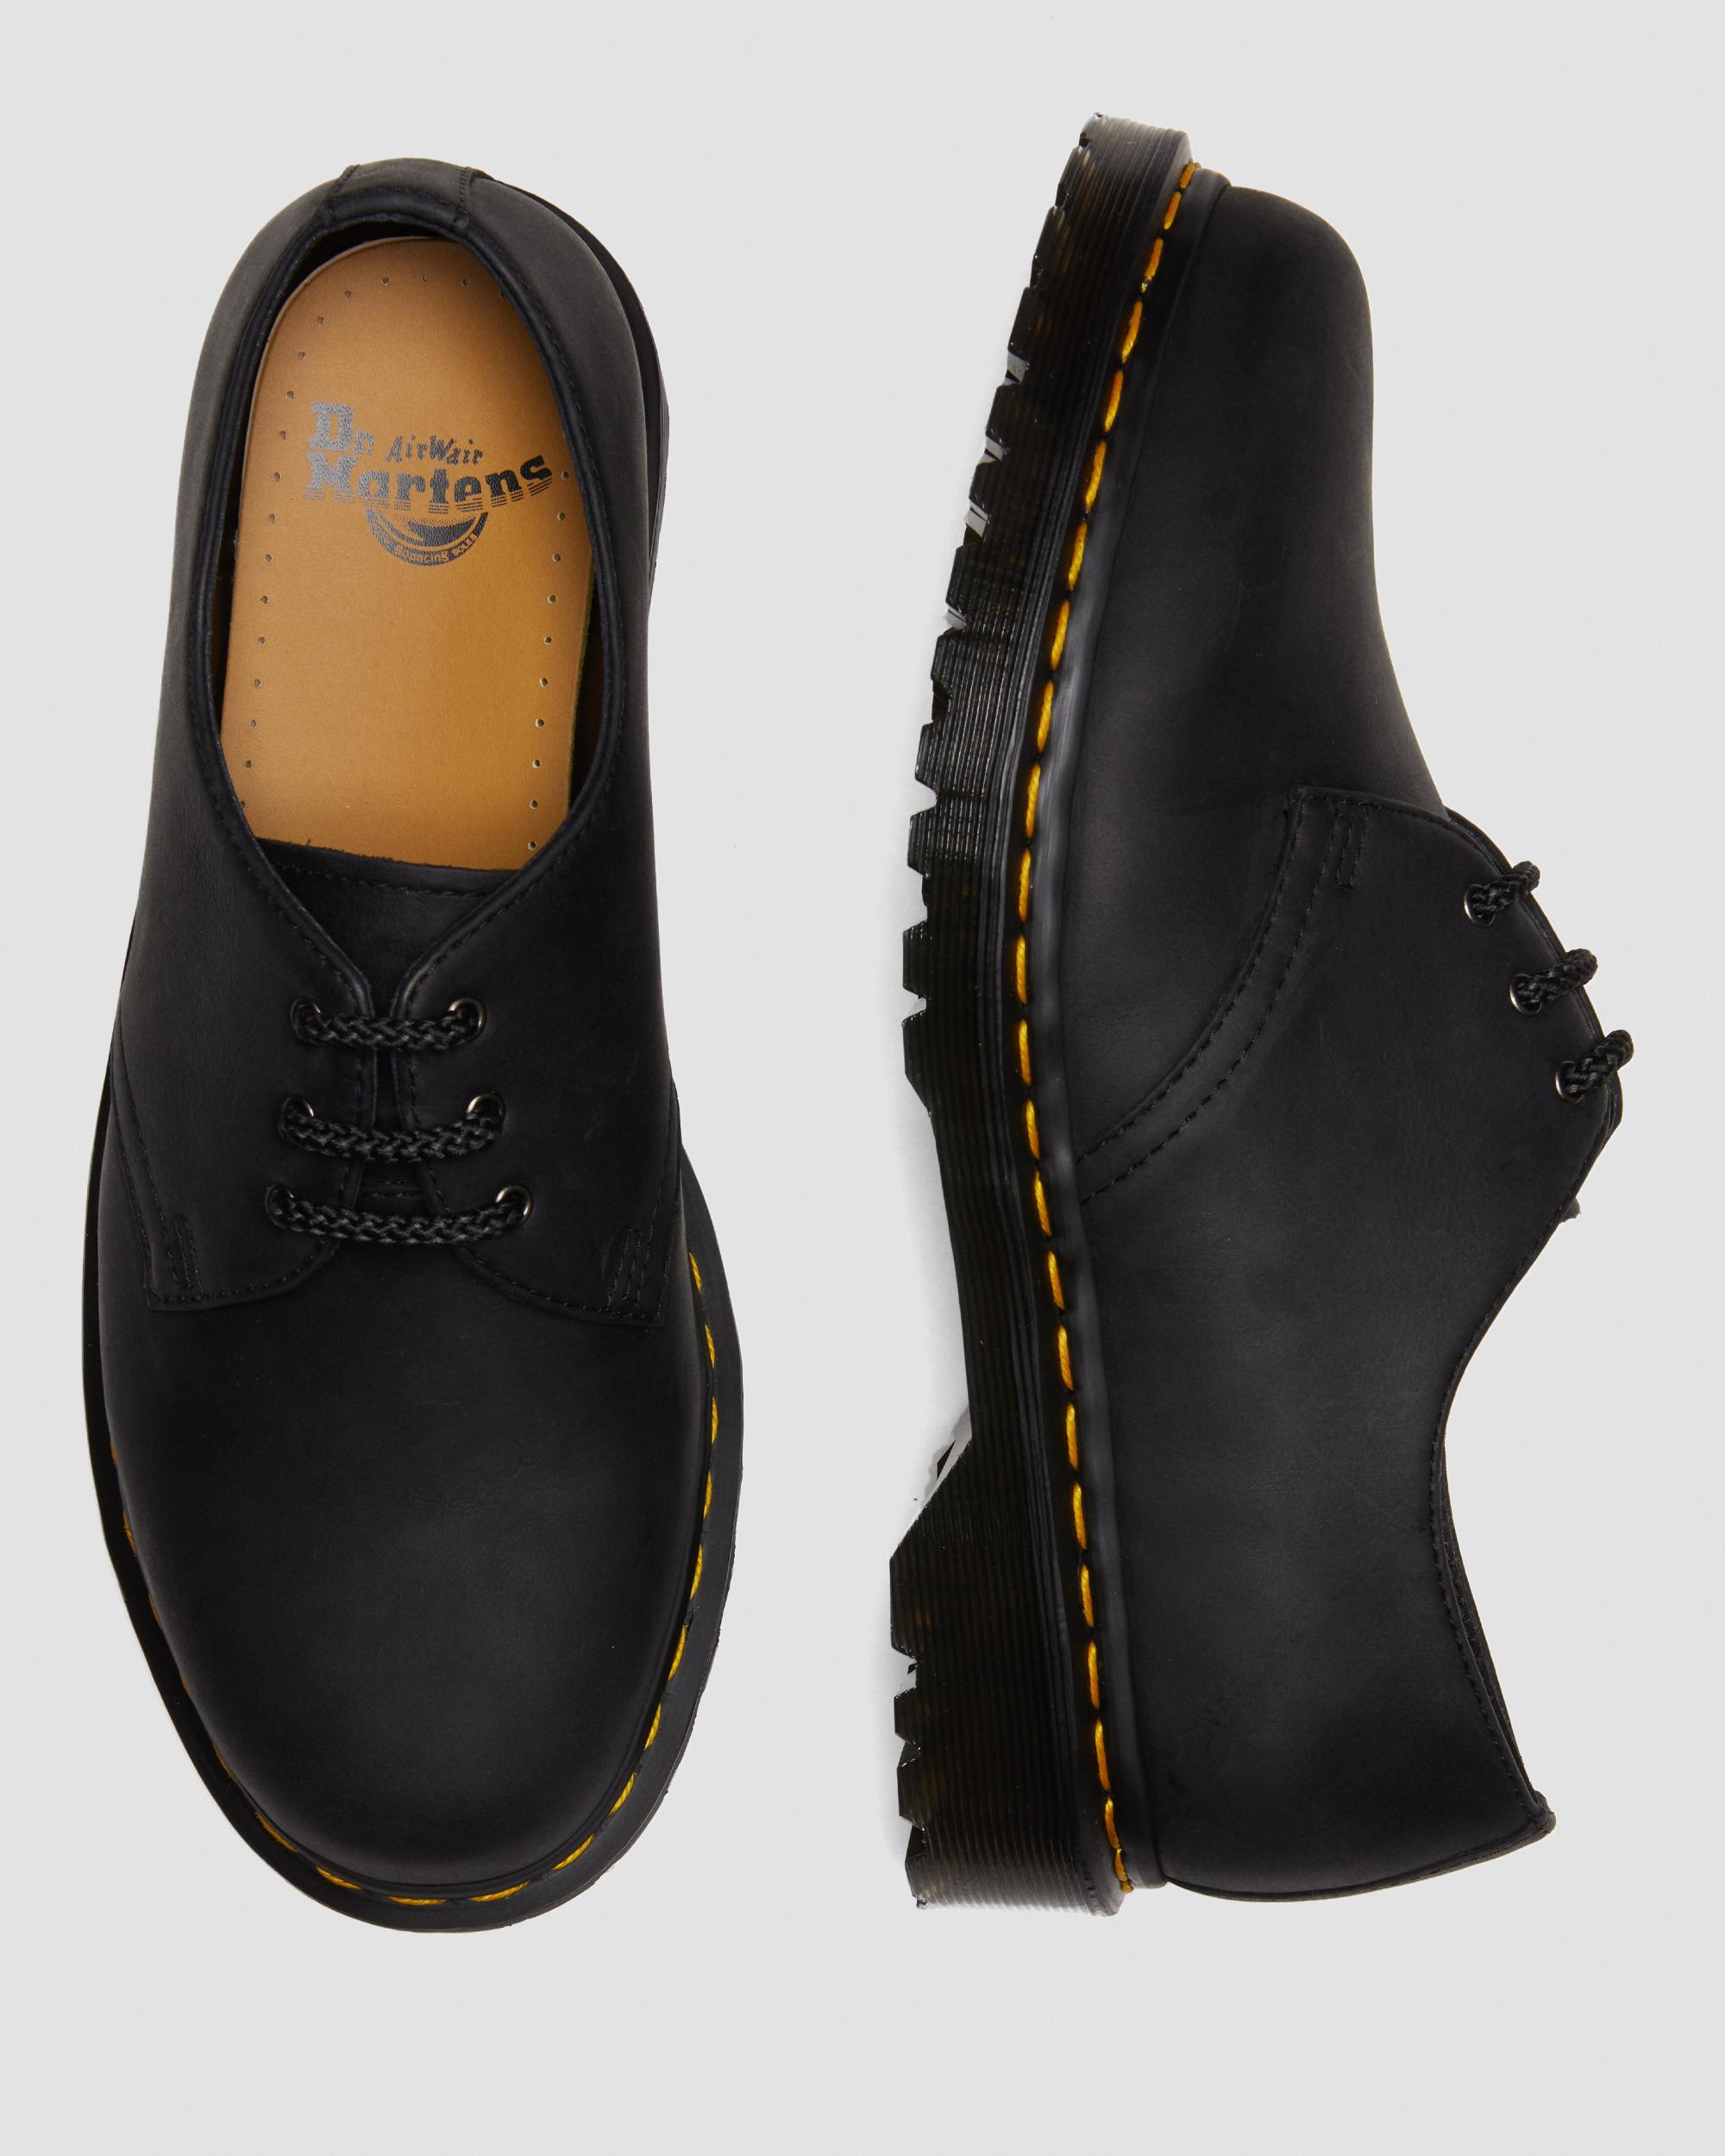 1461 Waxed Full Grain Leather Oxford Shoes, Black